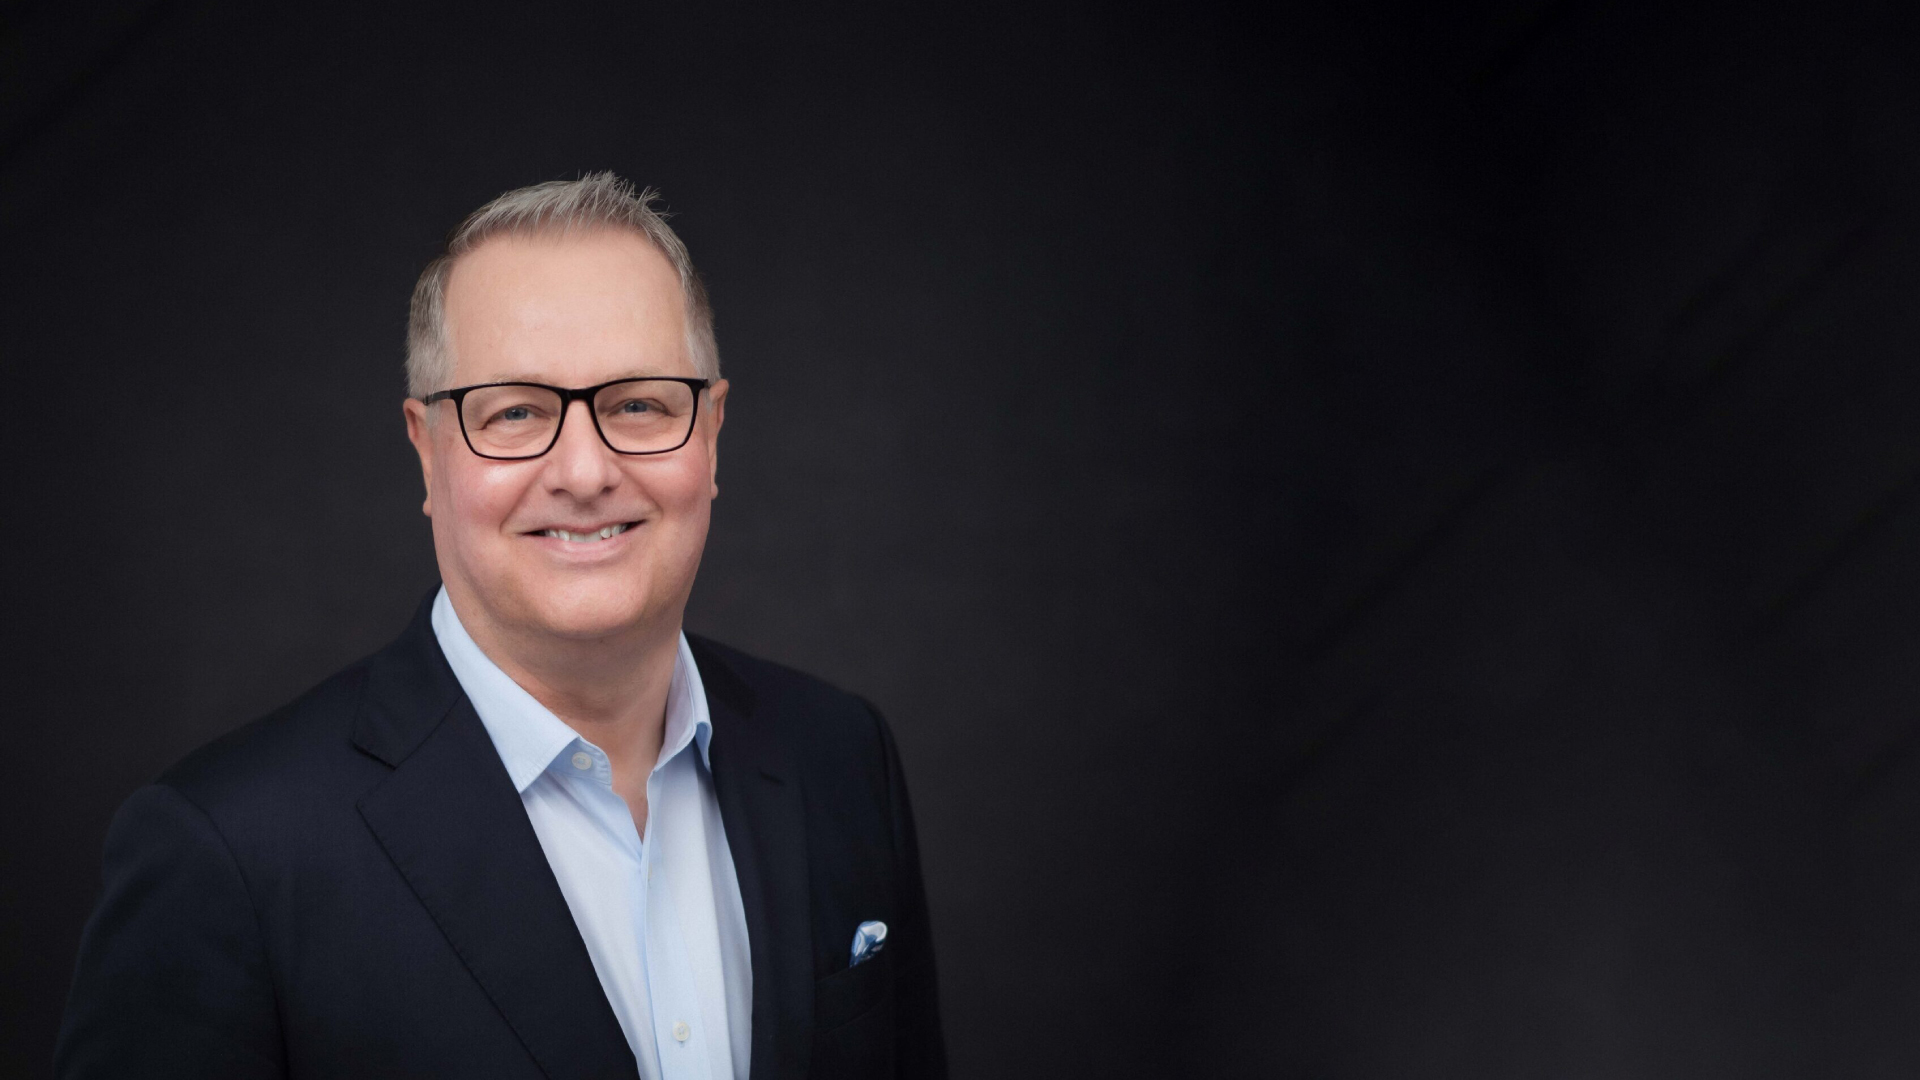 BWH HOTELS APPOINTS ROD MUNRO AS MANAGING DIRECTOR OF OPERATIONS FOR AUSTRALASIA